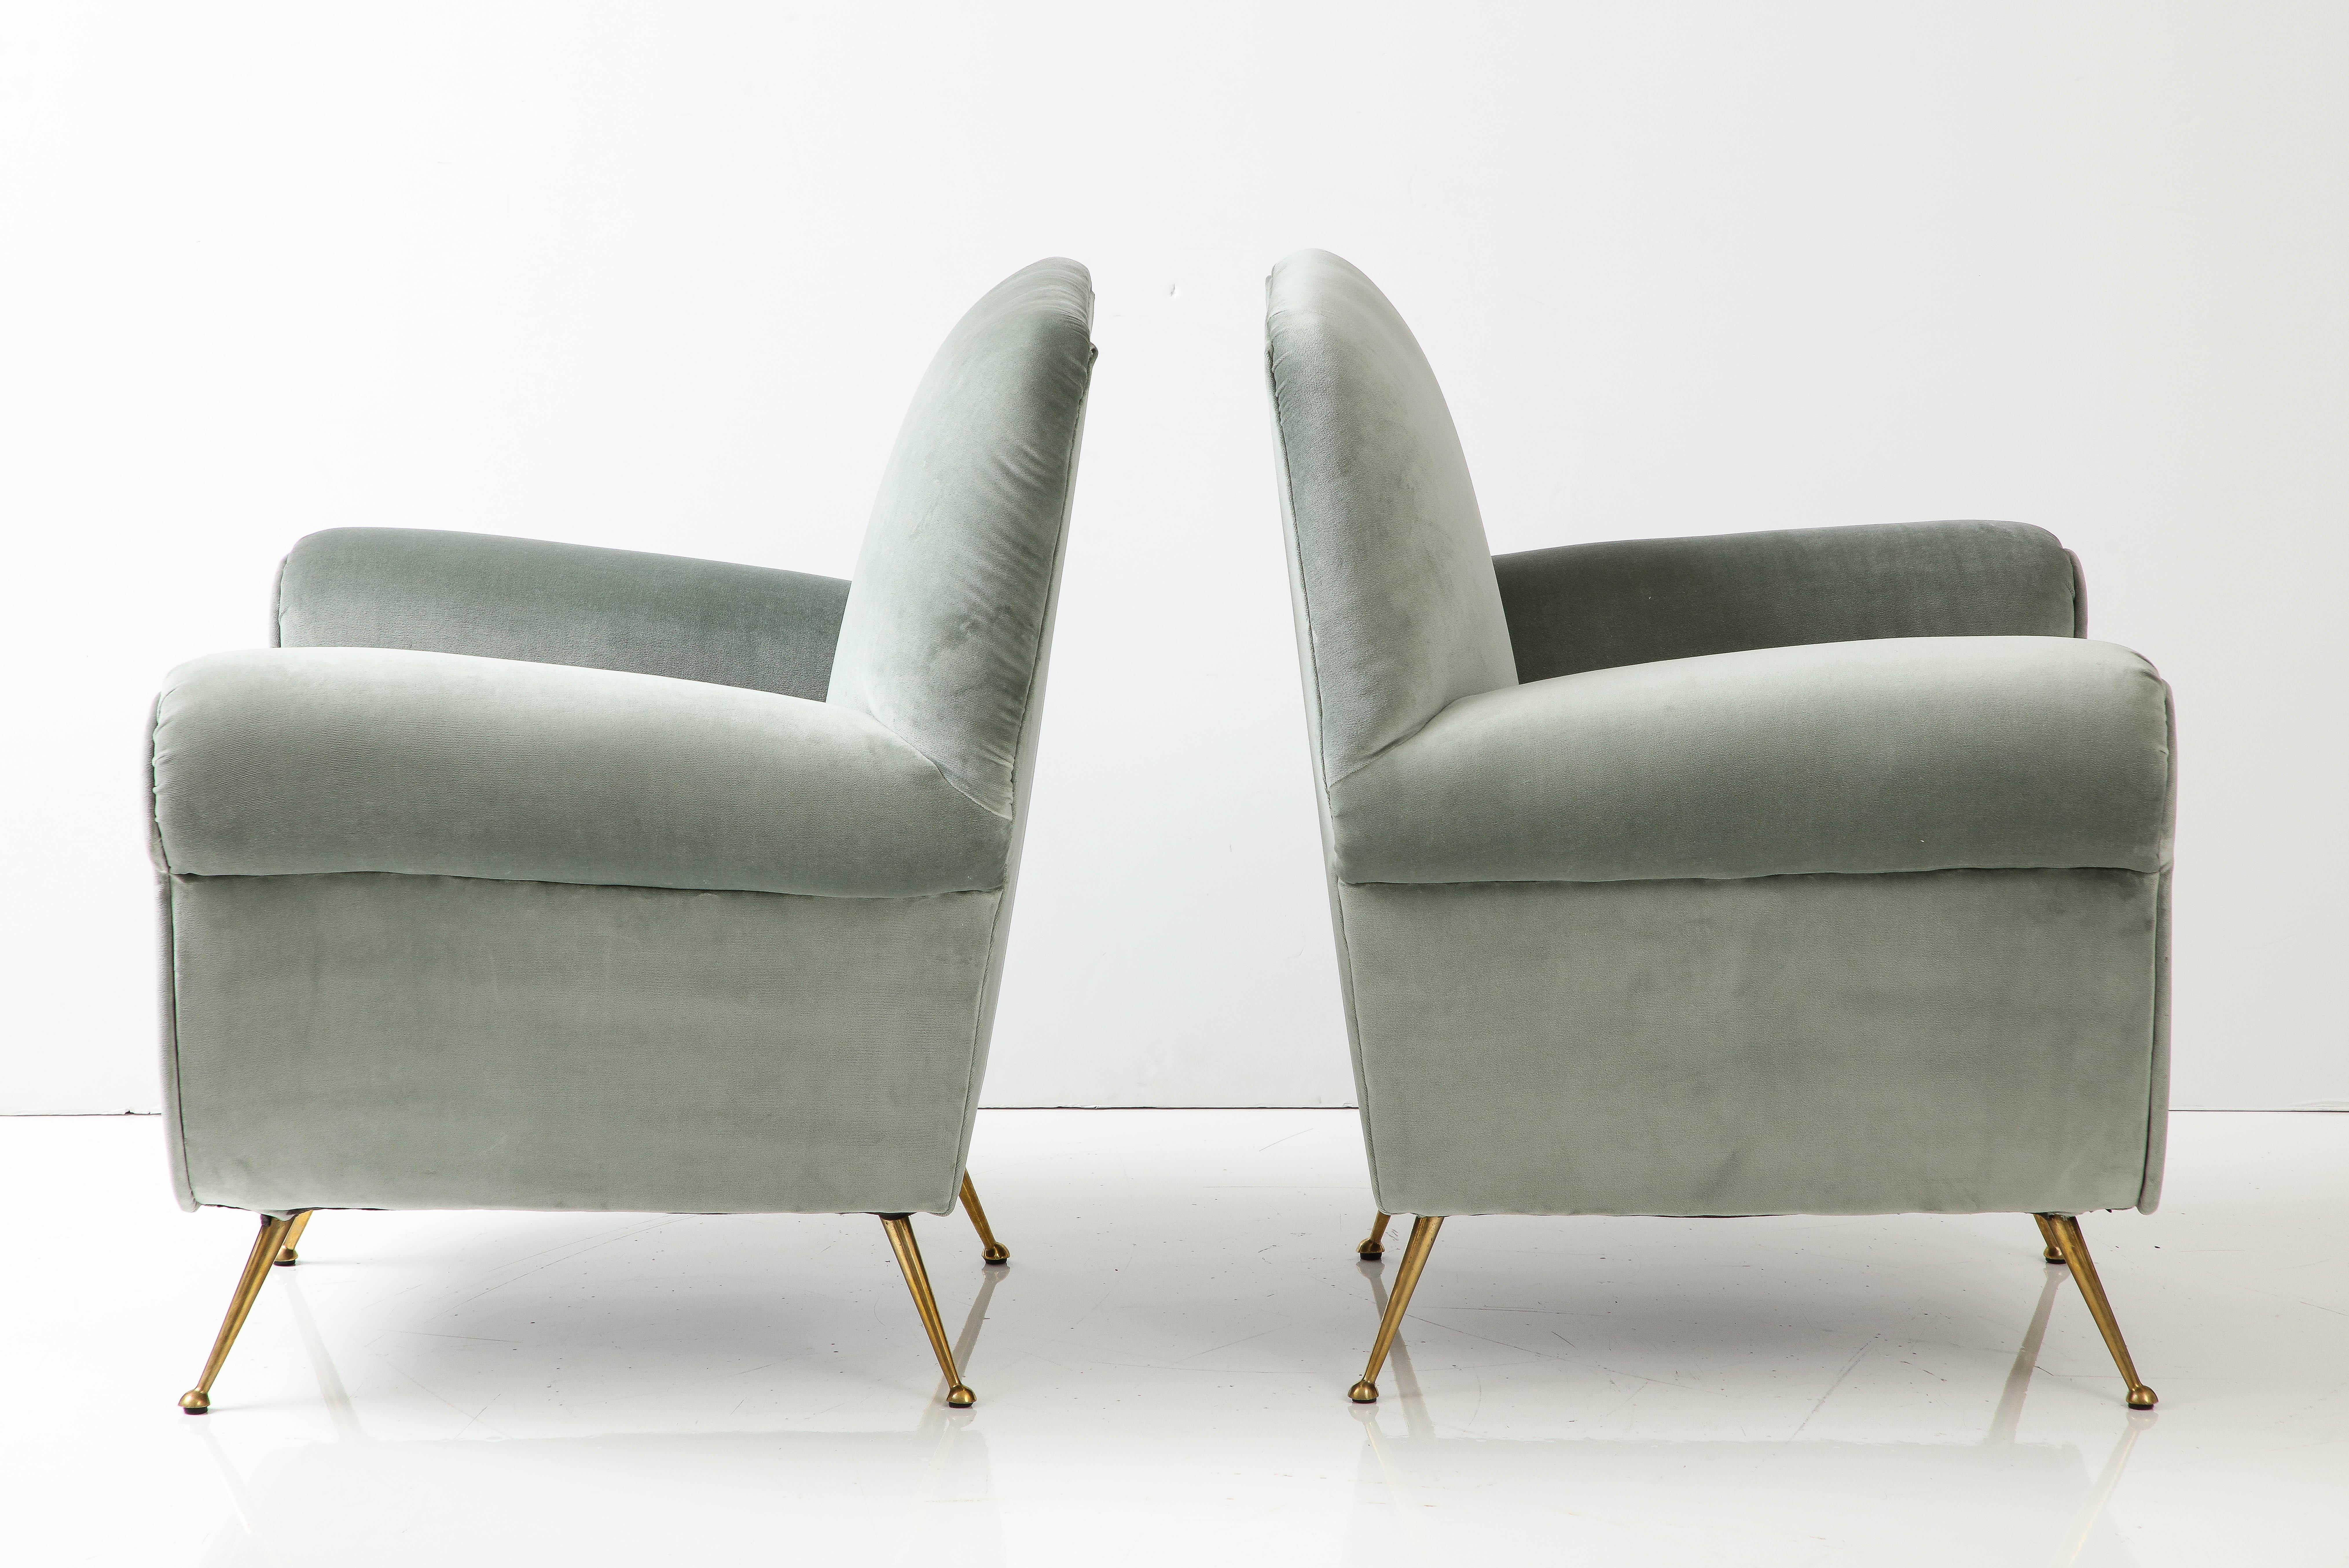 Mid-20th Century 1950s Modernist Lounge Chairs by Gigi Radice For Sale